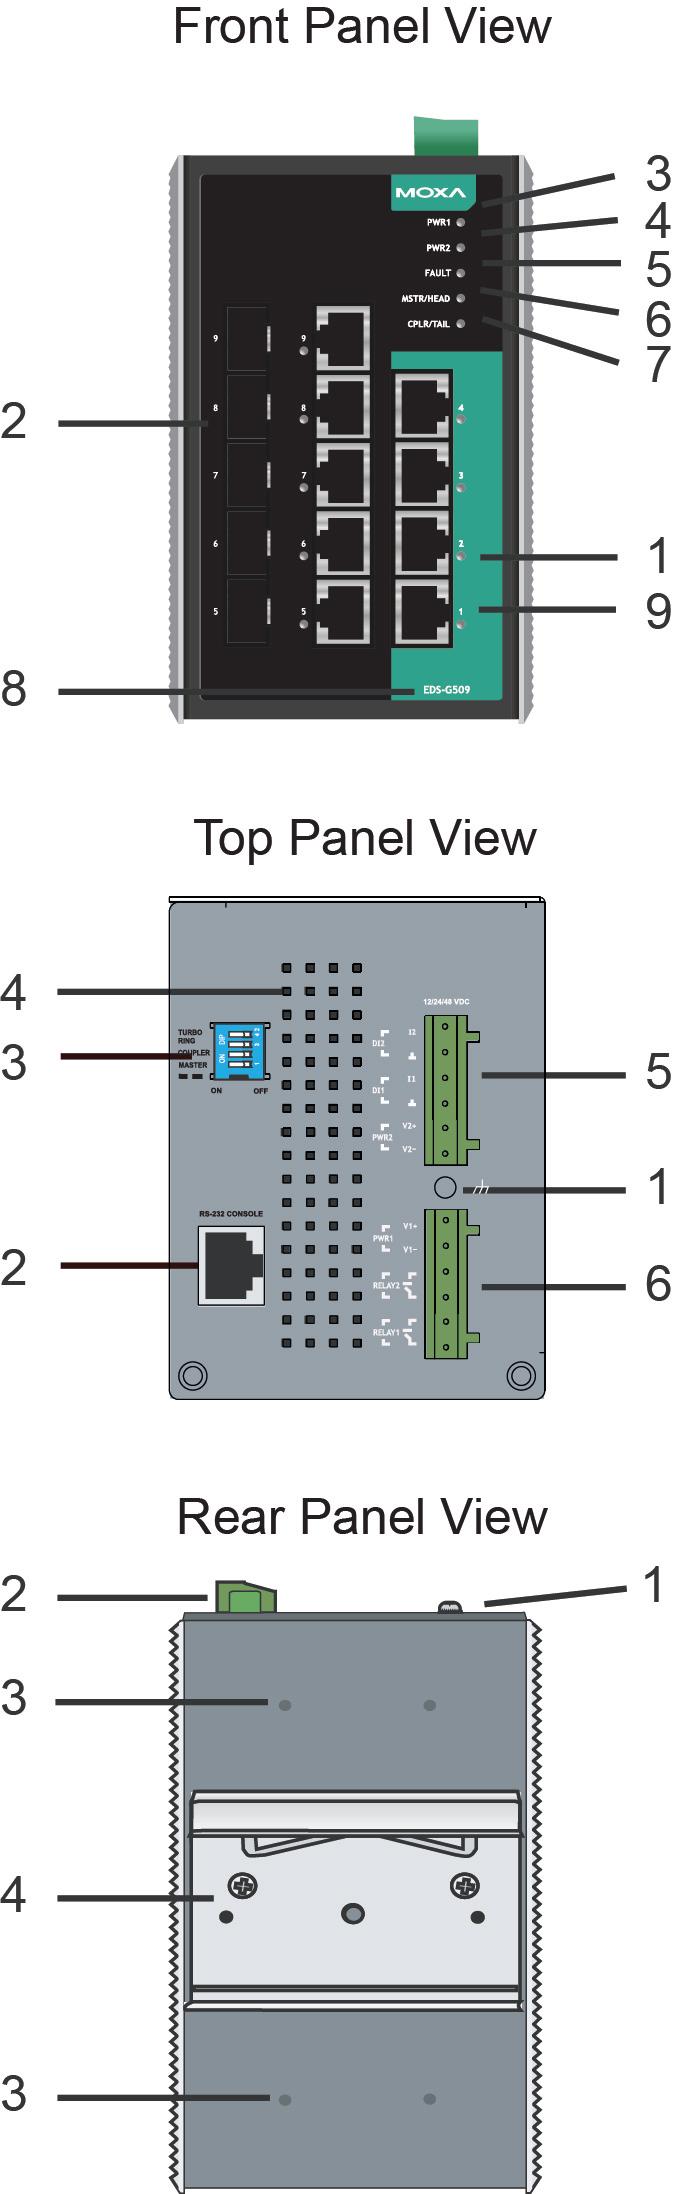 Panel Views of EDS-G509 Front Panel: 1. 1 to 4: 10/100/1000 BaseT(X) port 2. 5 to 9: 10/100/1000 BaseT(X) or 100/1000Base SFP slot combo ports 3. PWR1: LED for power input 1 4.